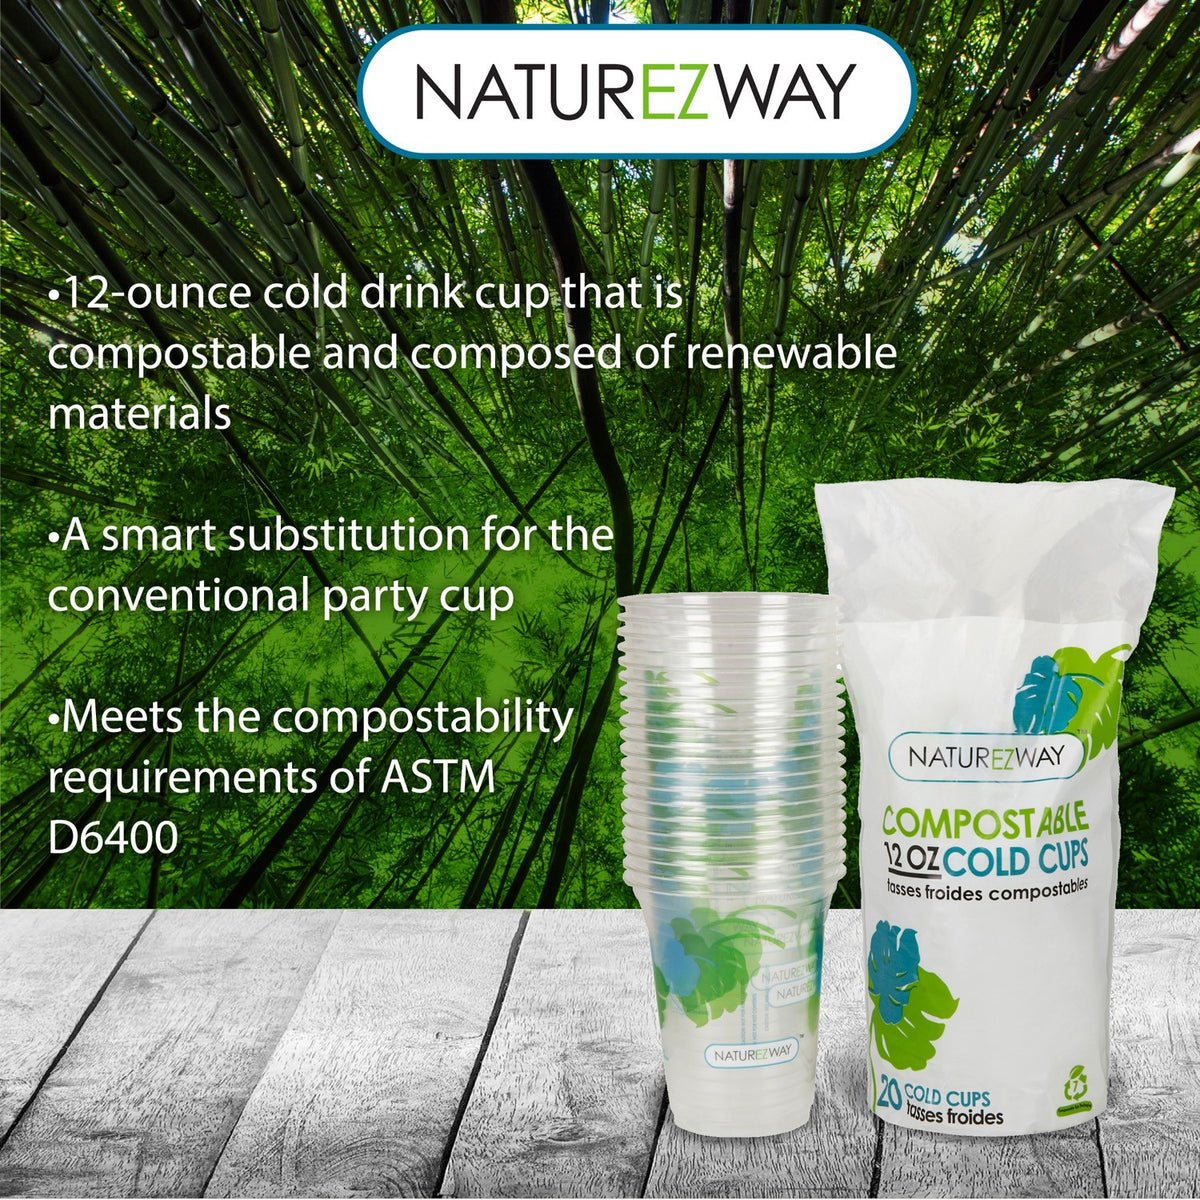 12 Oz. Compostable Bioplastic Drinking Cup - Sweet Flavor